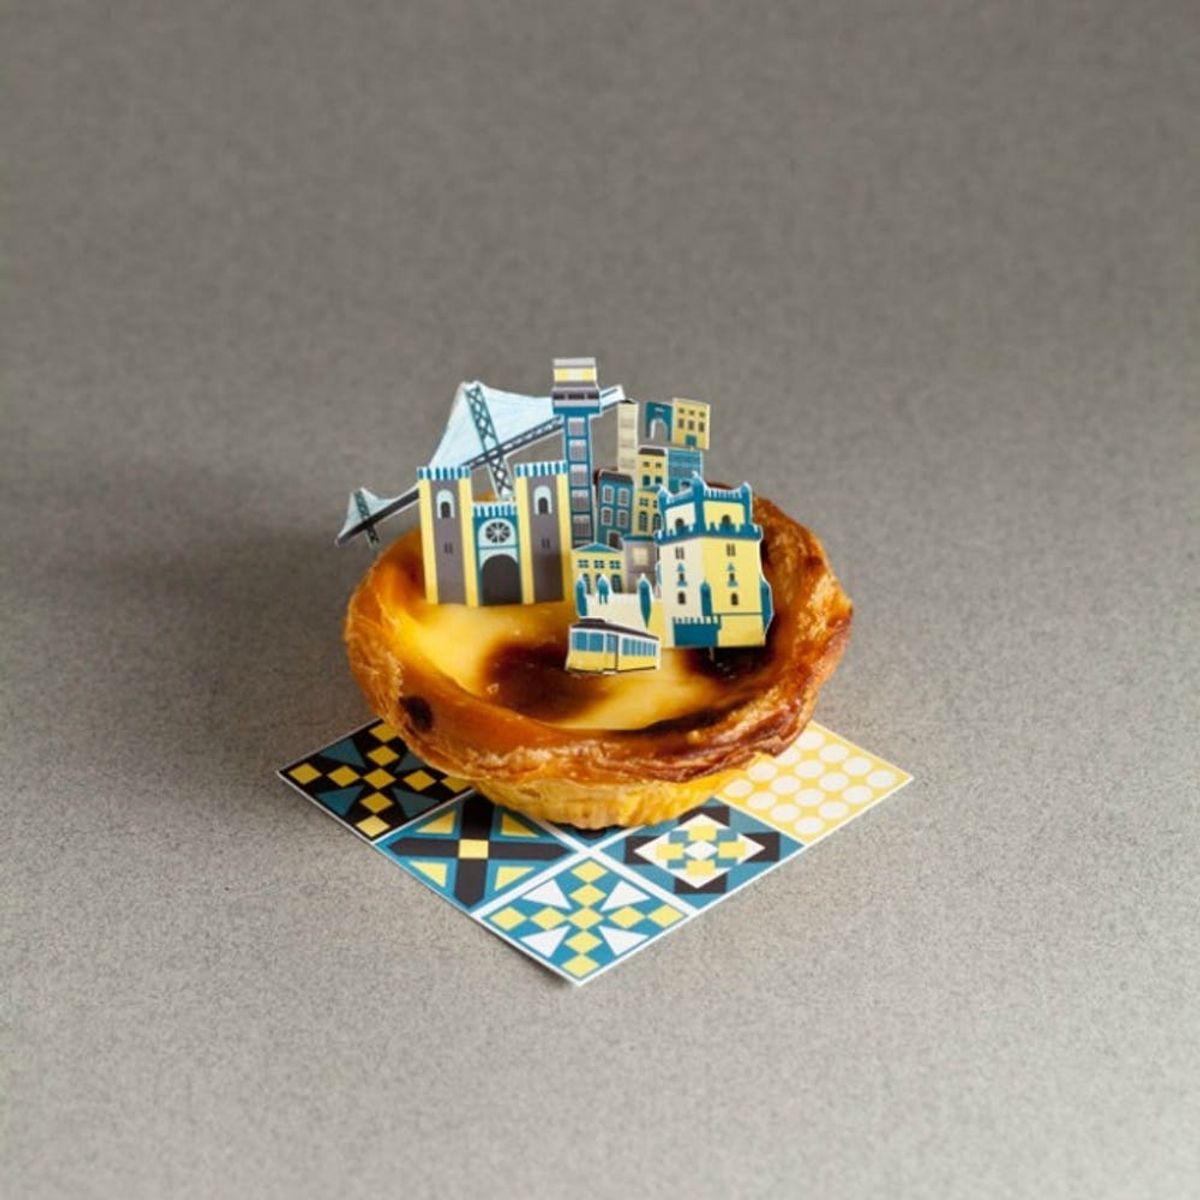 This Art Will Trigger Wanderlust AND Make You Hungry